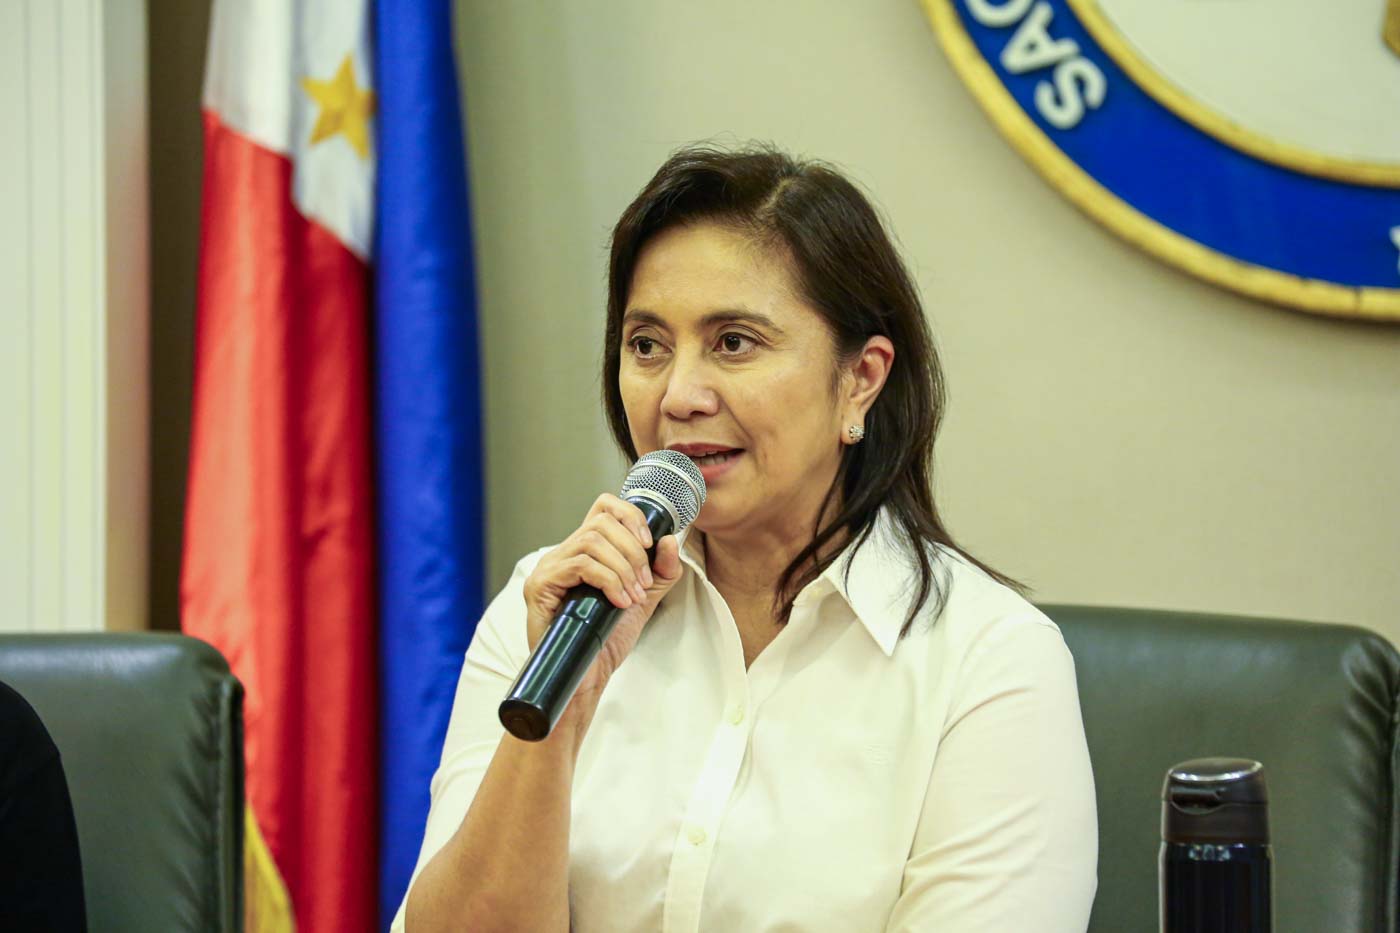 NOT JUST WITH U.S. Vice President Leni Robredo continues consulting with various local and international groups on how to reform President Rodrigo Duerte's drug war. File photo by Jire Carreon/Rappler 